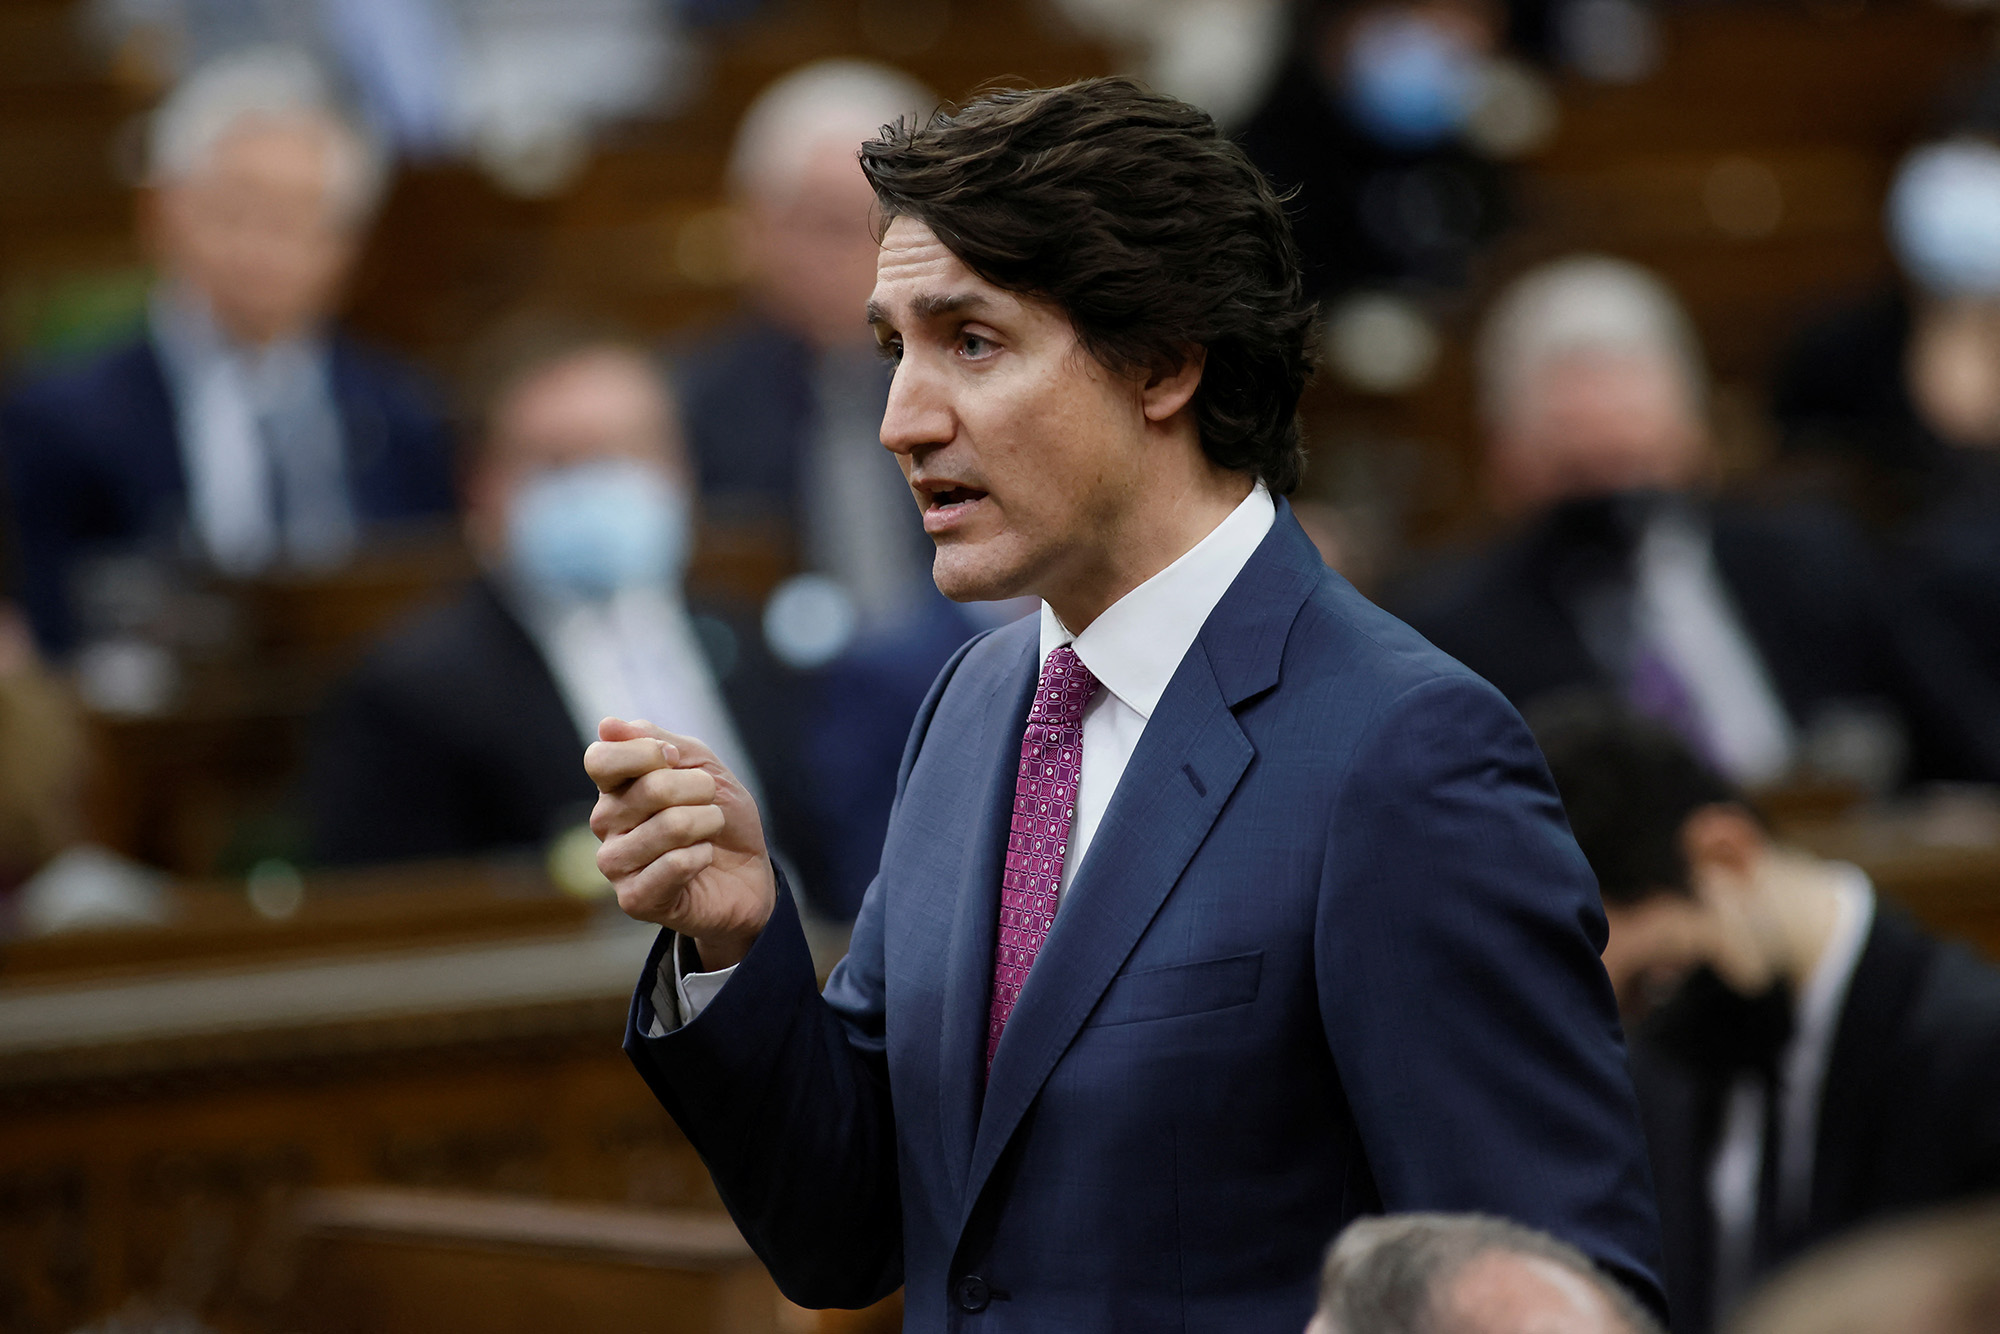 Canada's Prime Minister Justin Trudeau speaks during Question Period in the House of Commons on Parliament Hill in Ottawa, Ontario, Canada, on April 27.